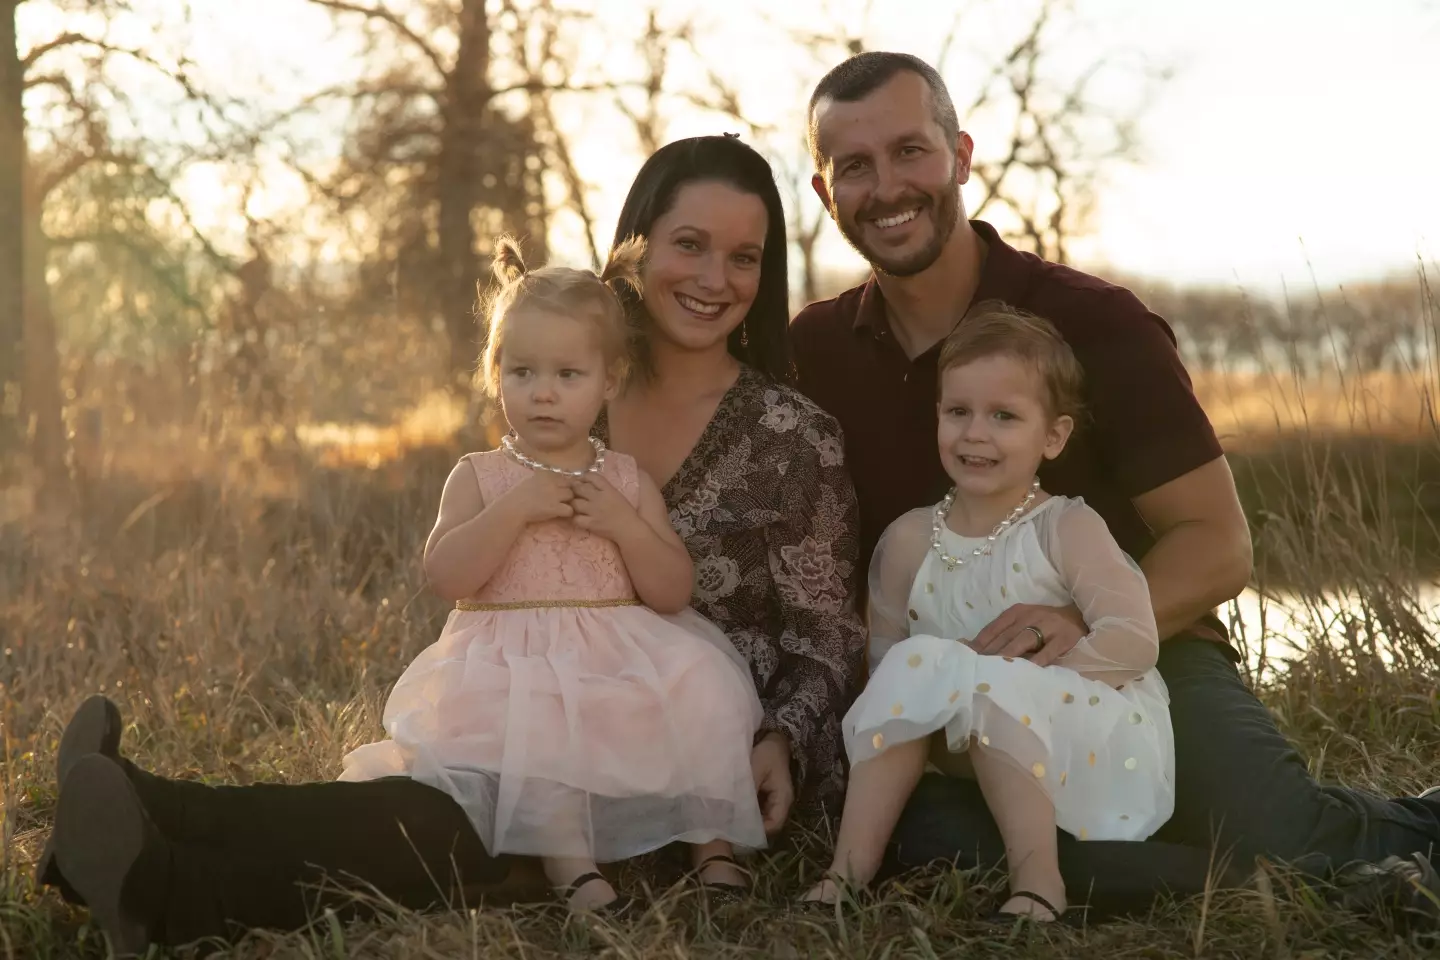 Chris Watts murdered his pregnant wife and daughters.